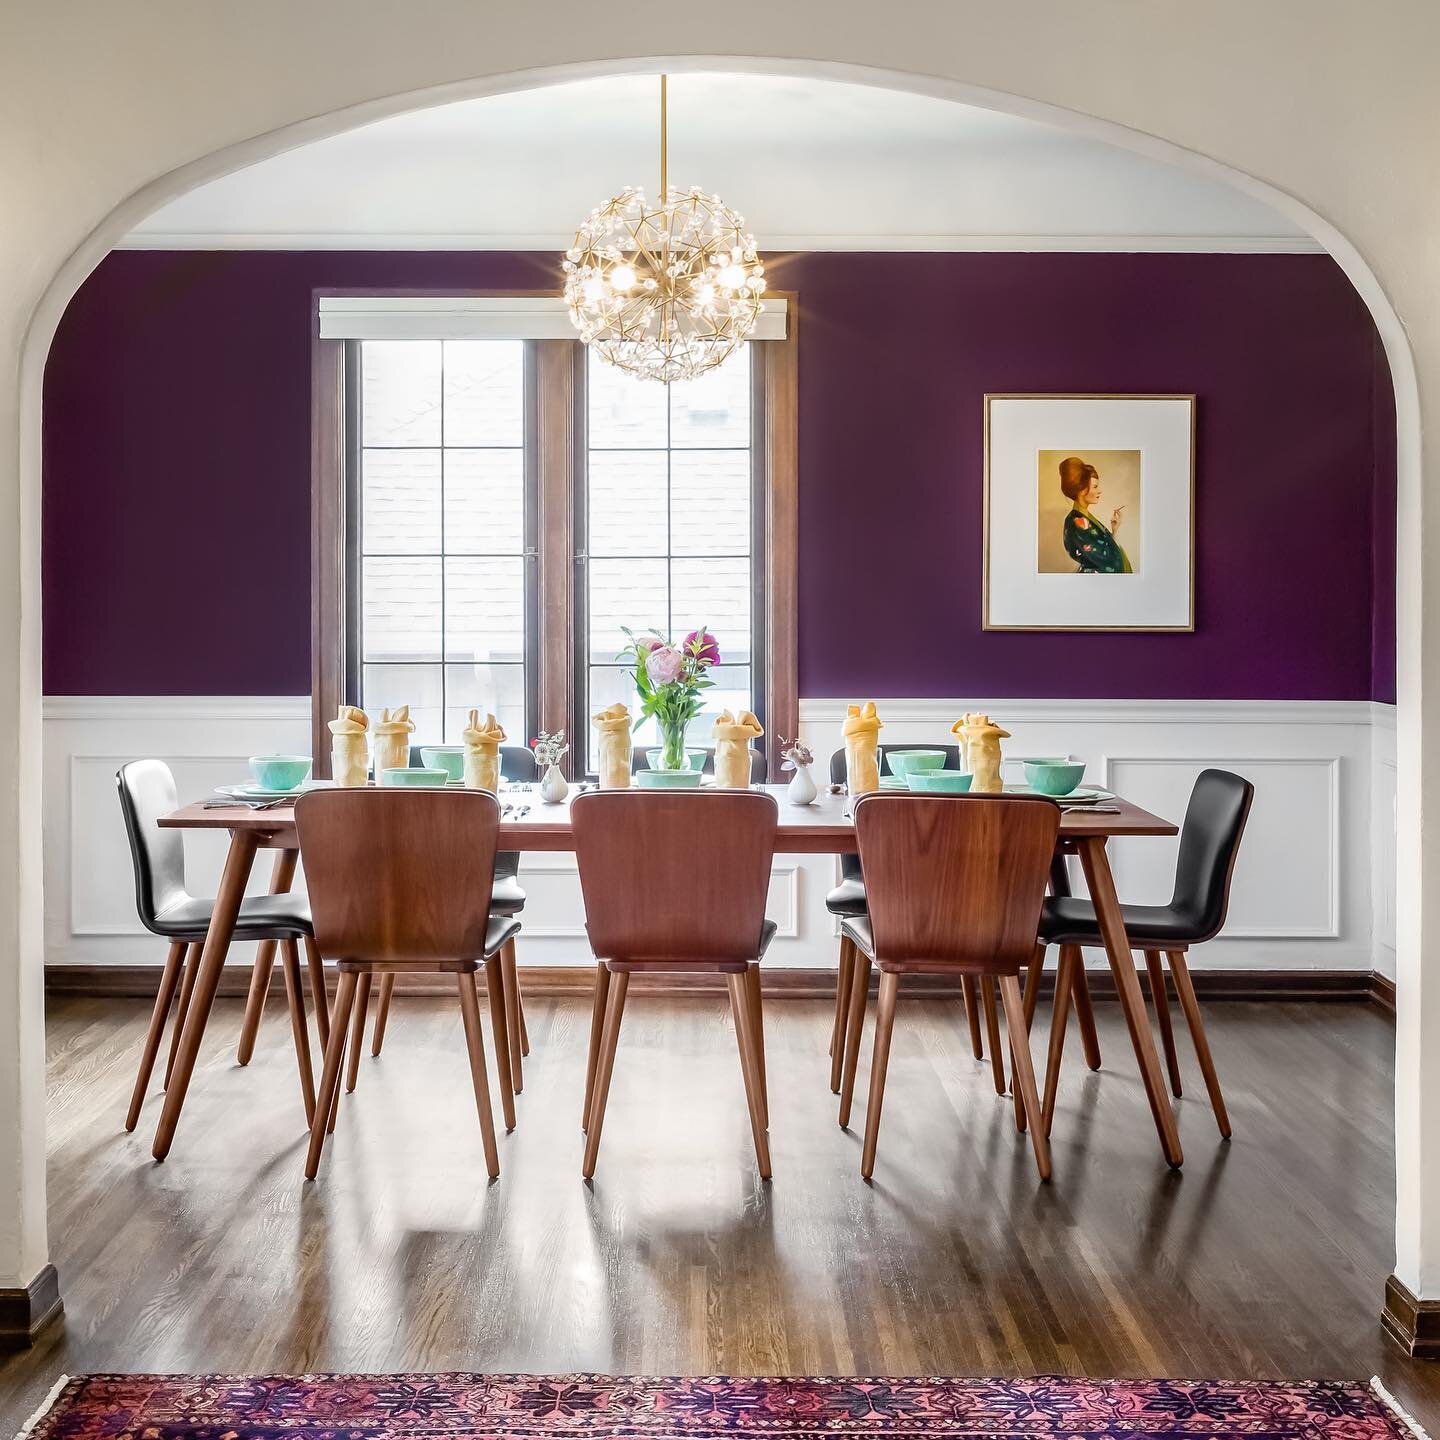 From purple to purple... this room has seen a second transformation! We kept the regal hue on the walls, just made a few critical updates to the other elements in the room... looking forward to sharing new photos in a few months... And with it, some 